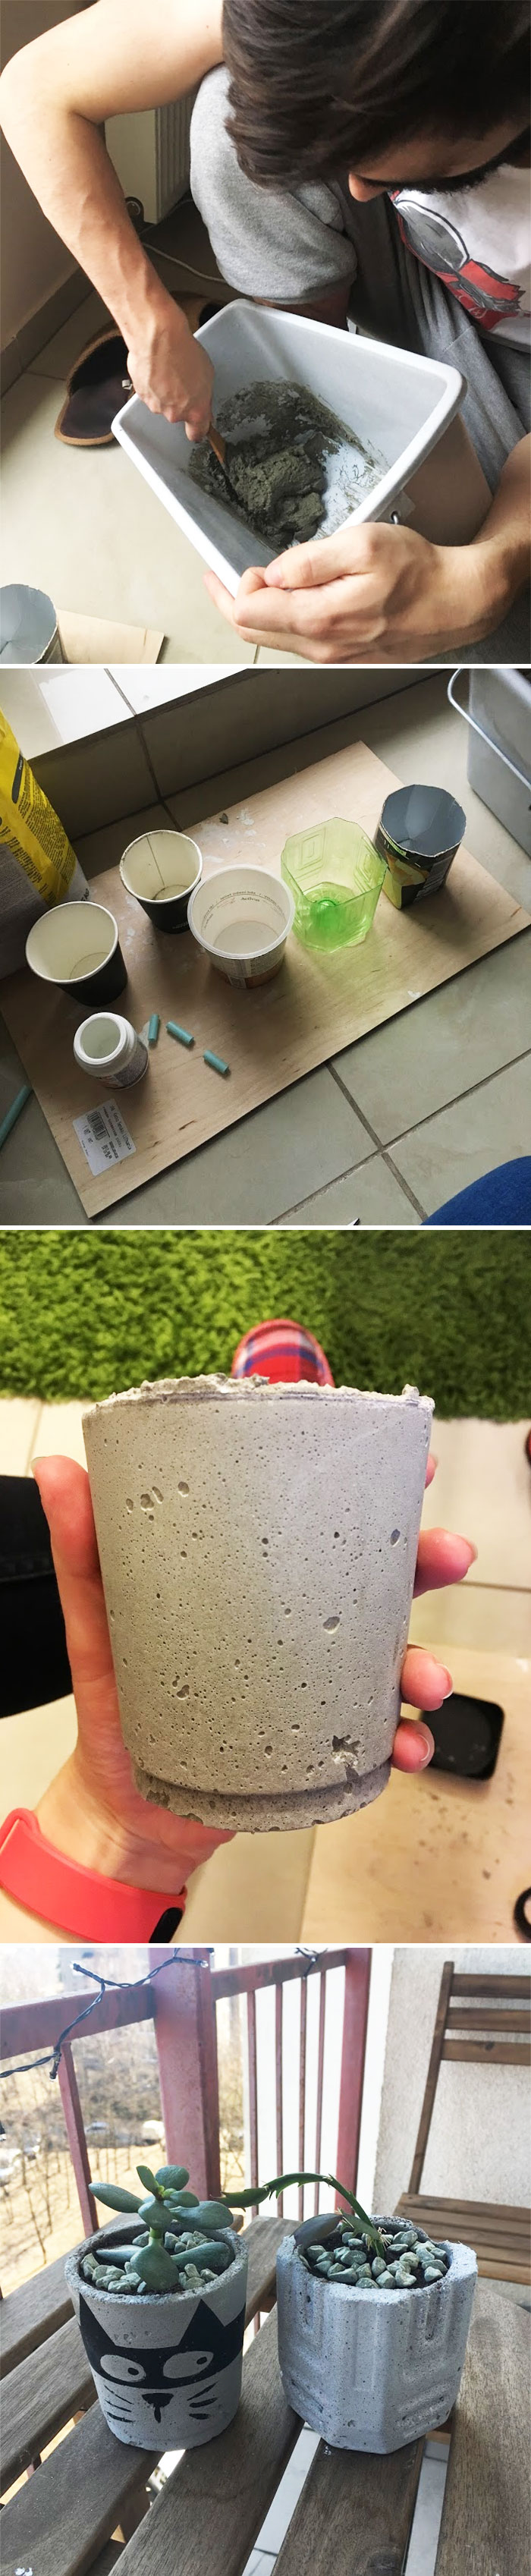 My First Attempt At Making Cement Planters